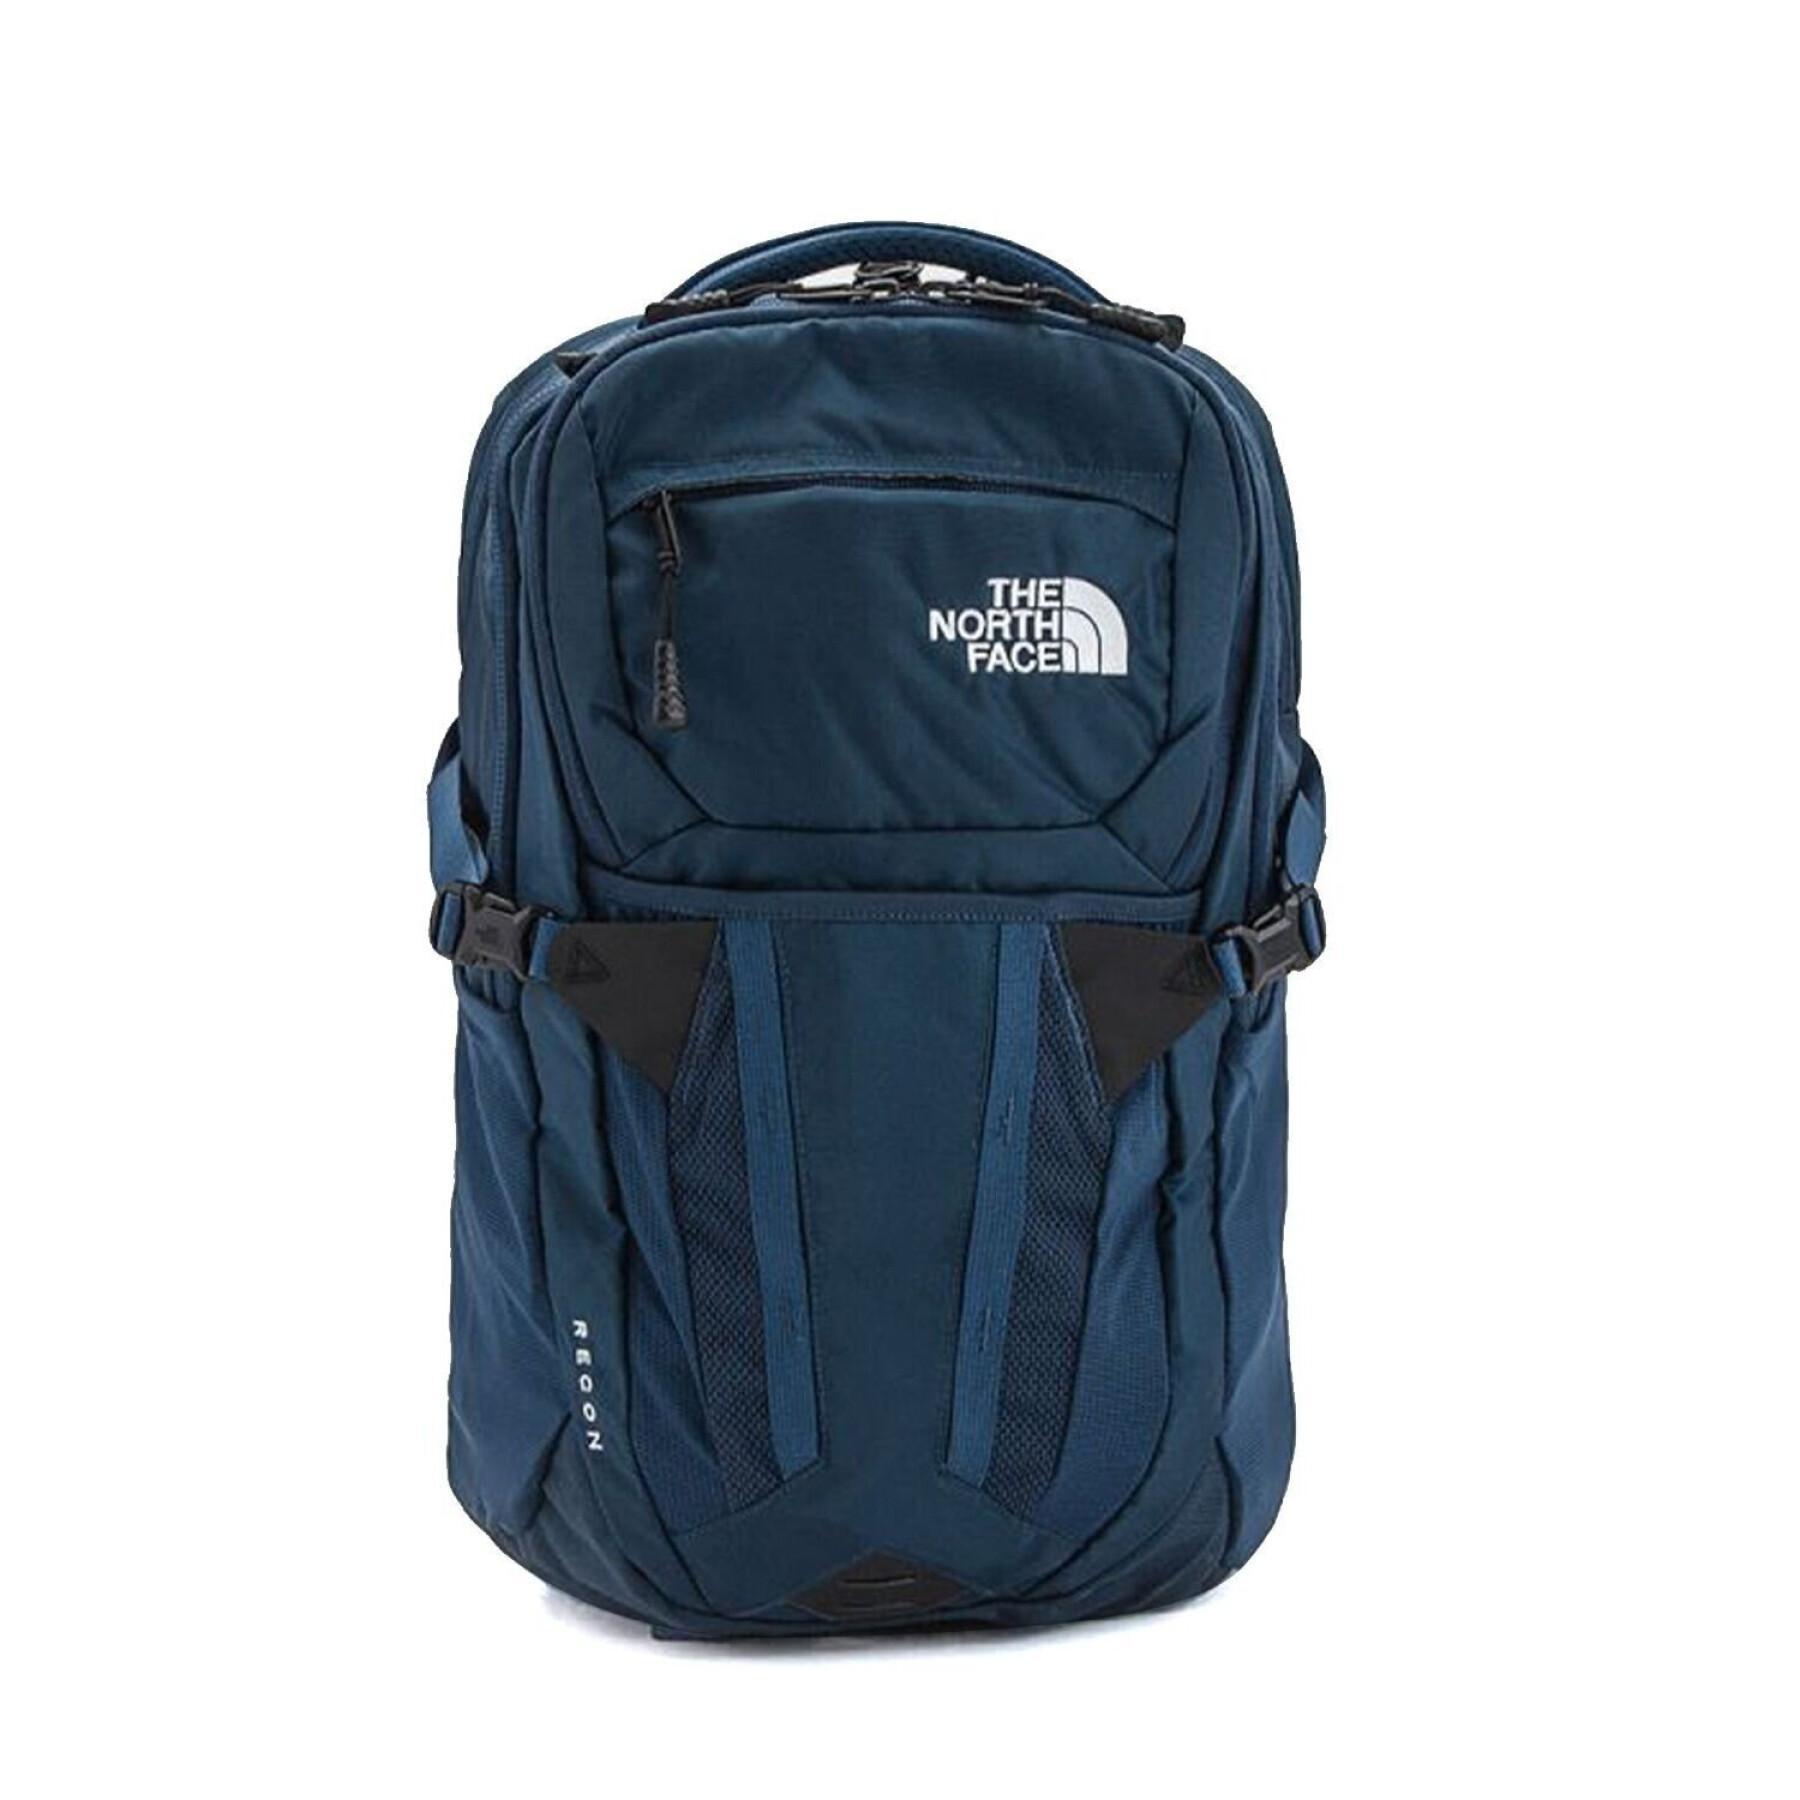 Rucksack The North Face Recon